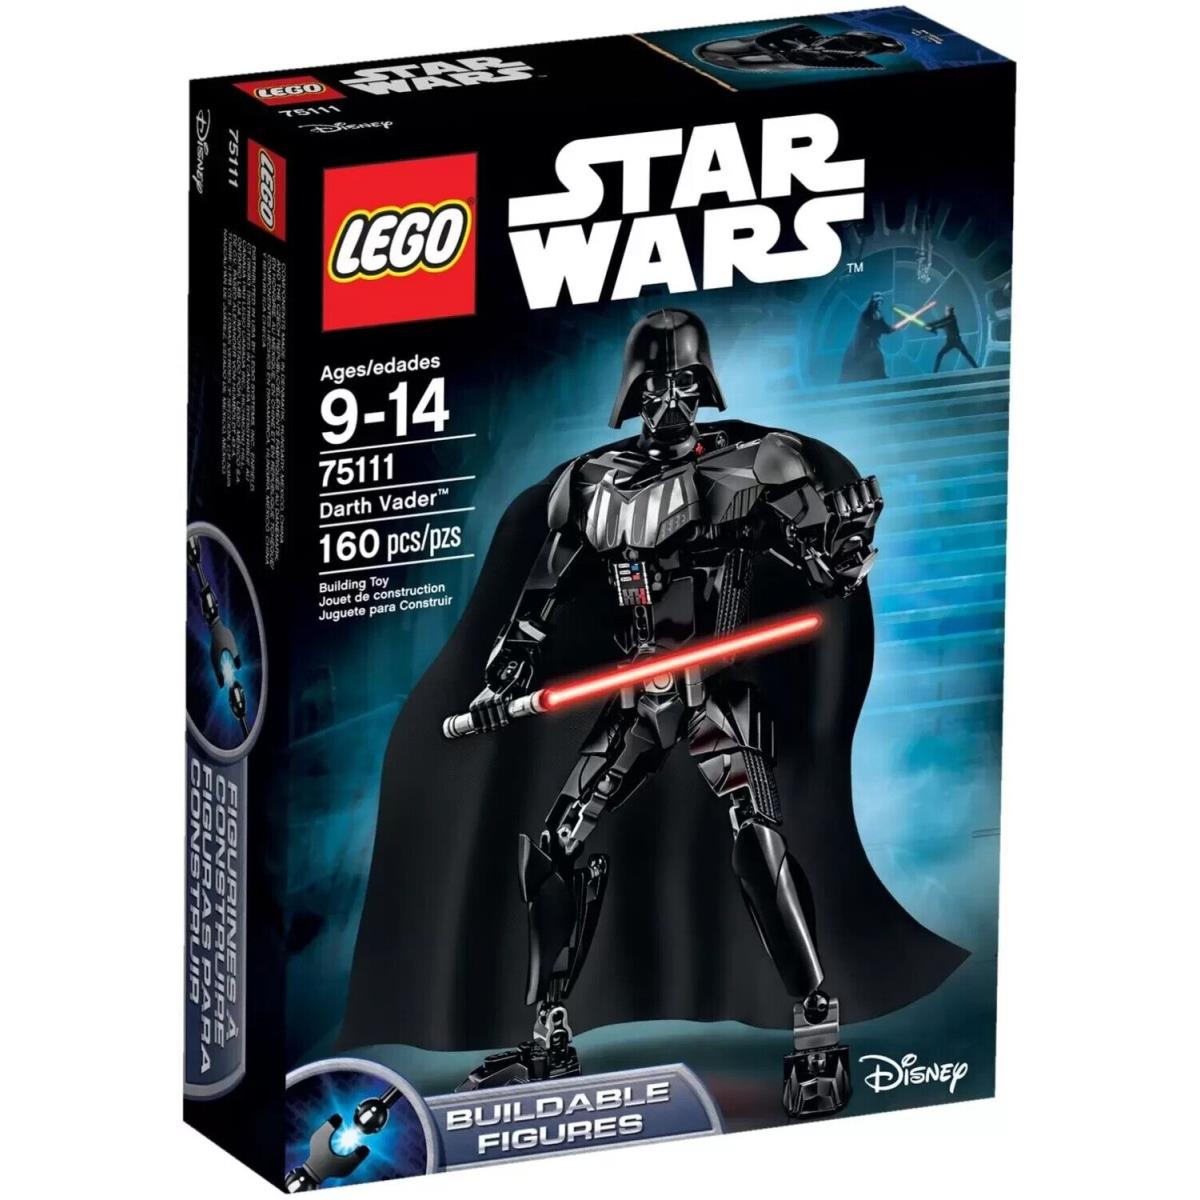 Lego Star Wars Buildable Figure Darth Vader 75111 Buildable Figure